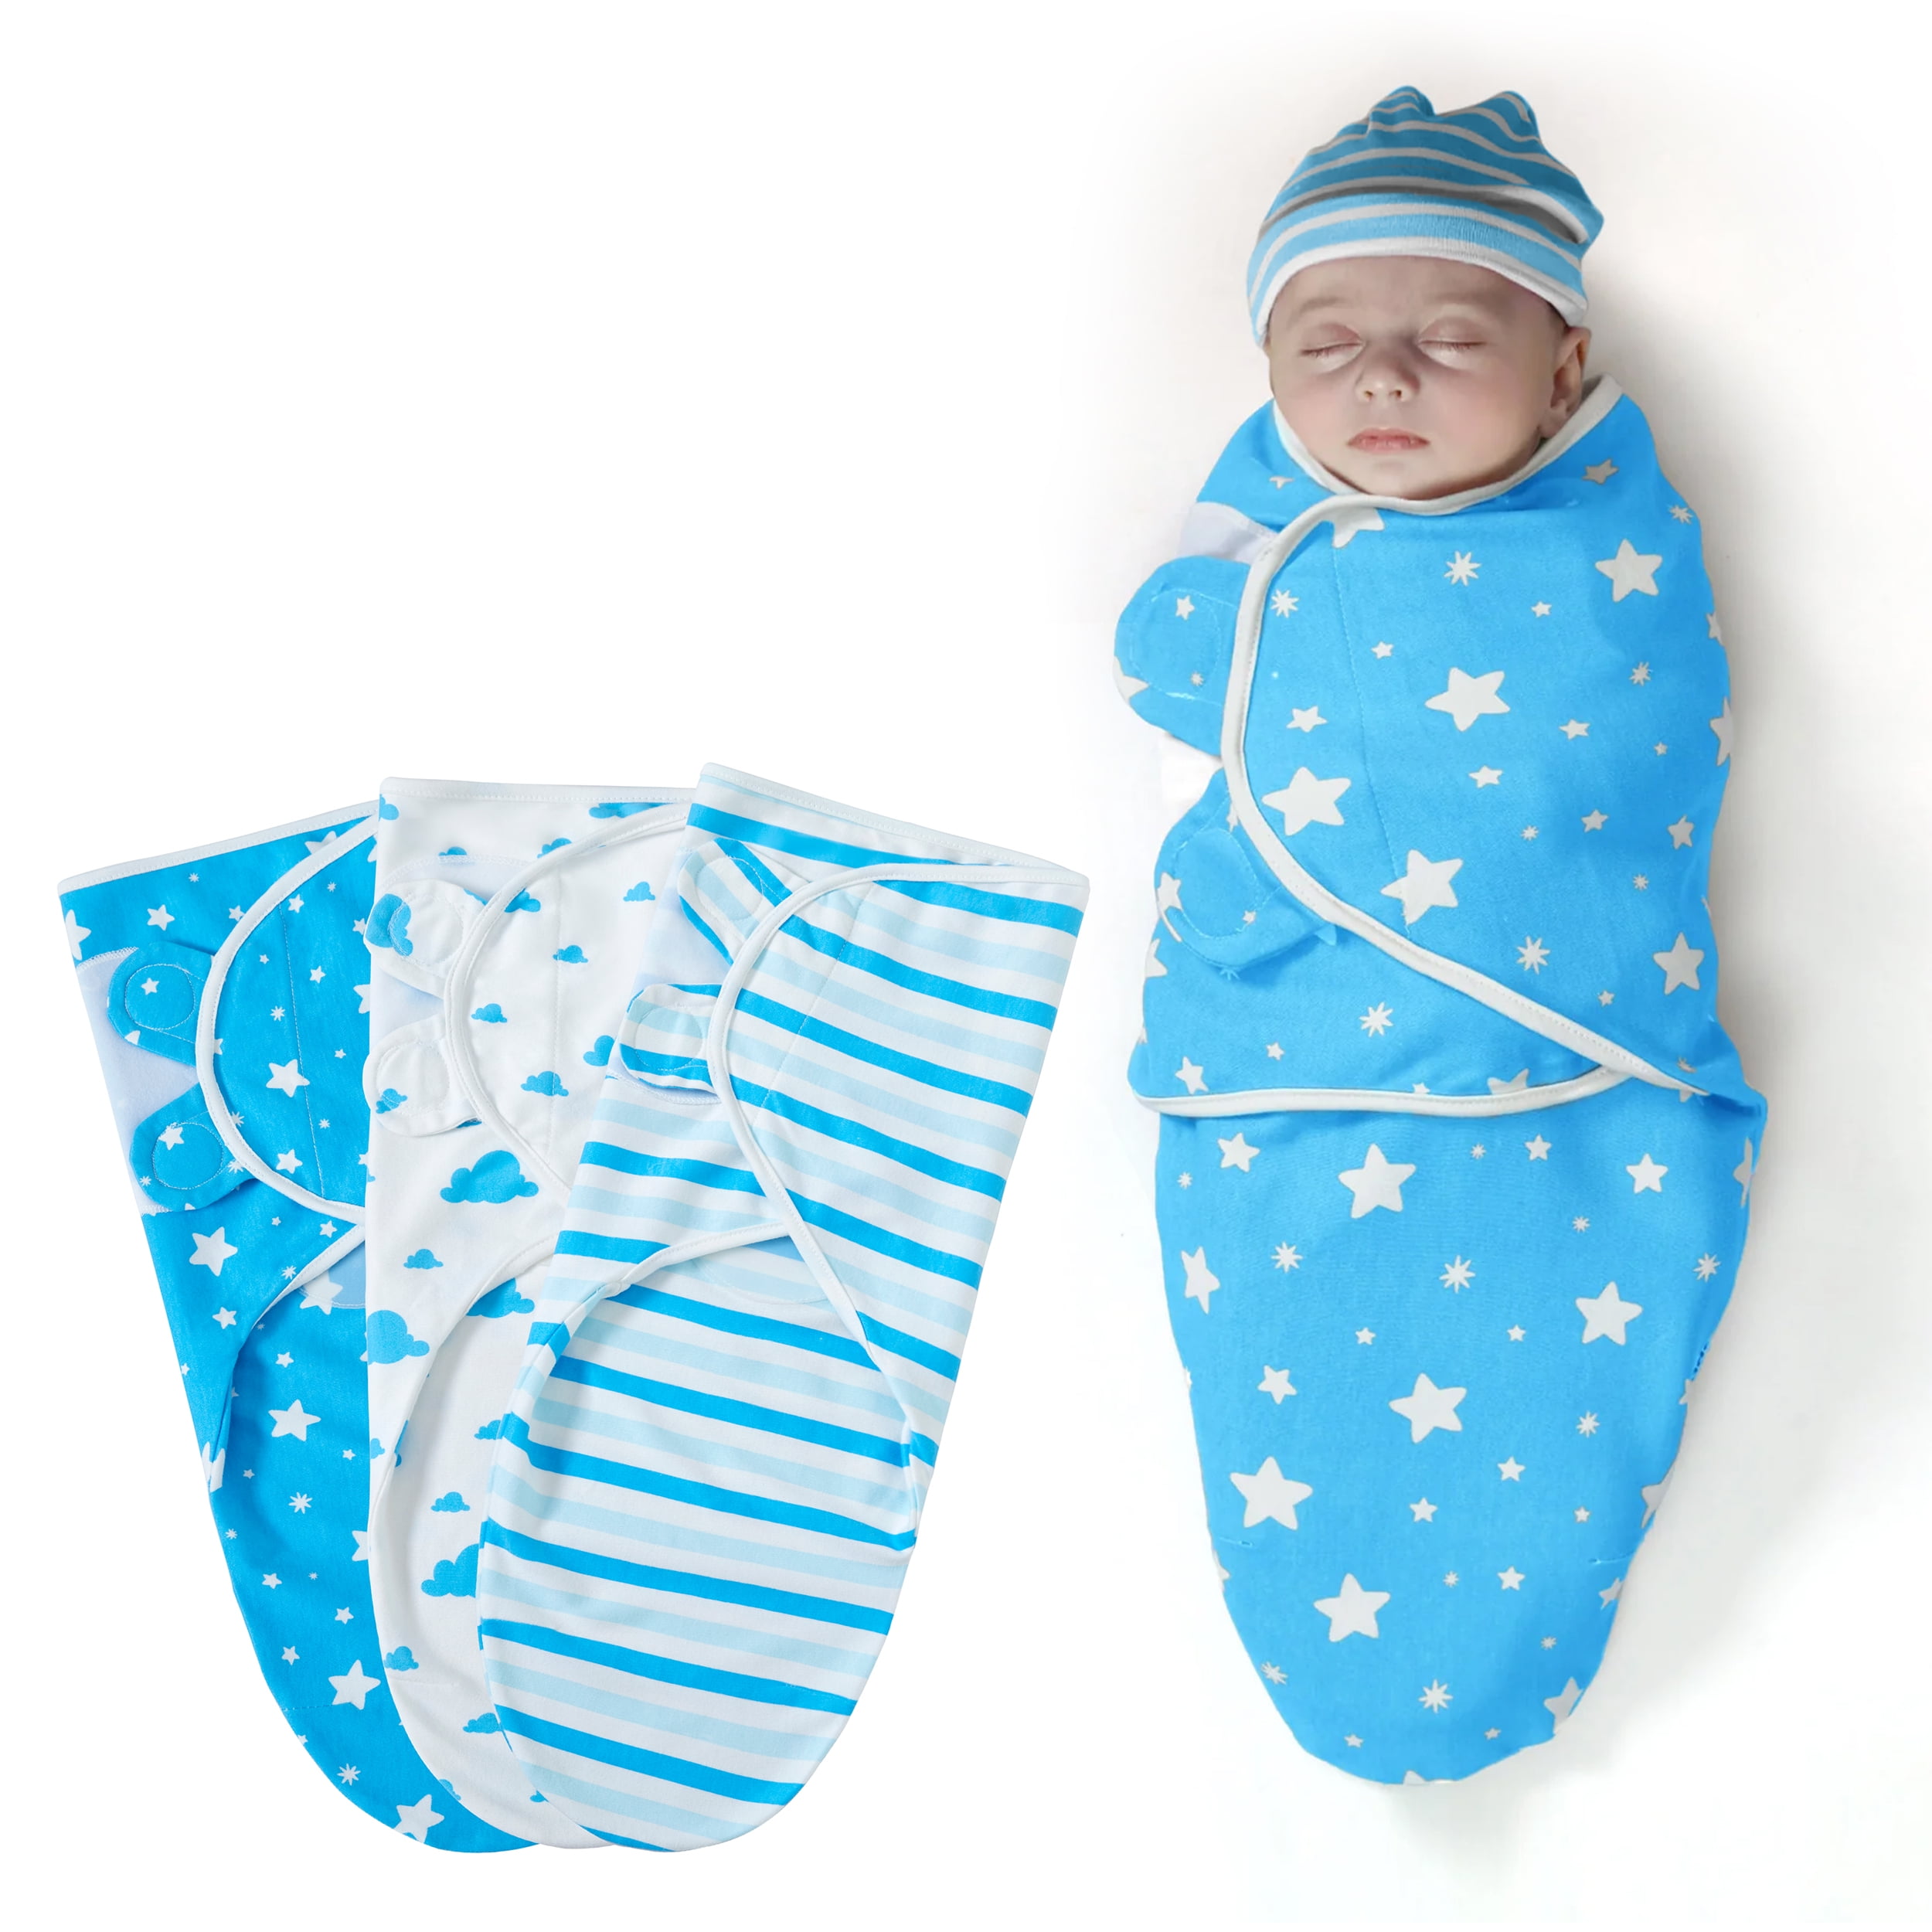 Baby Muslin Cloth Swaddle - 0-12 Months, Pack of 2 (Blue Whale